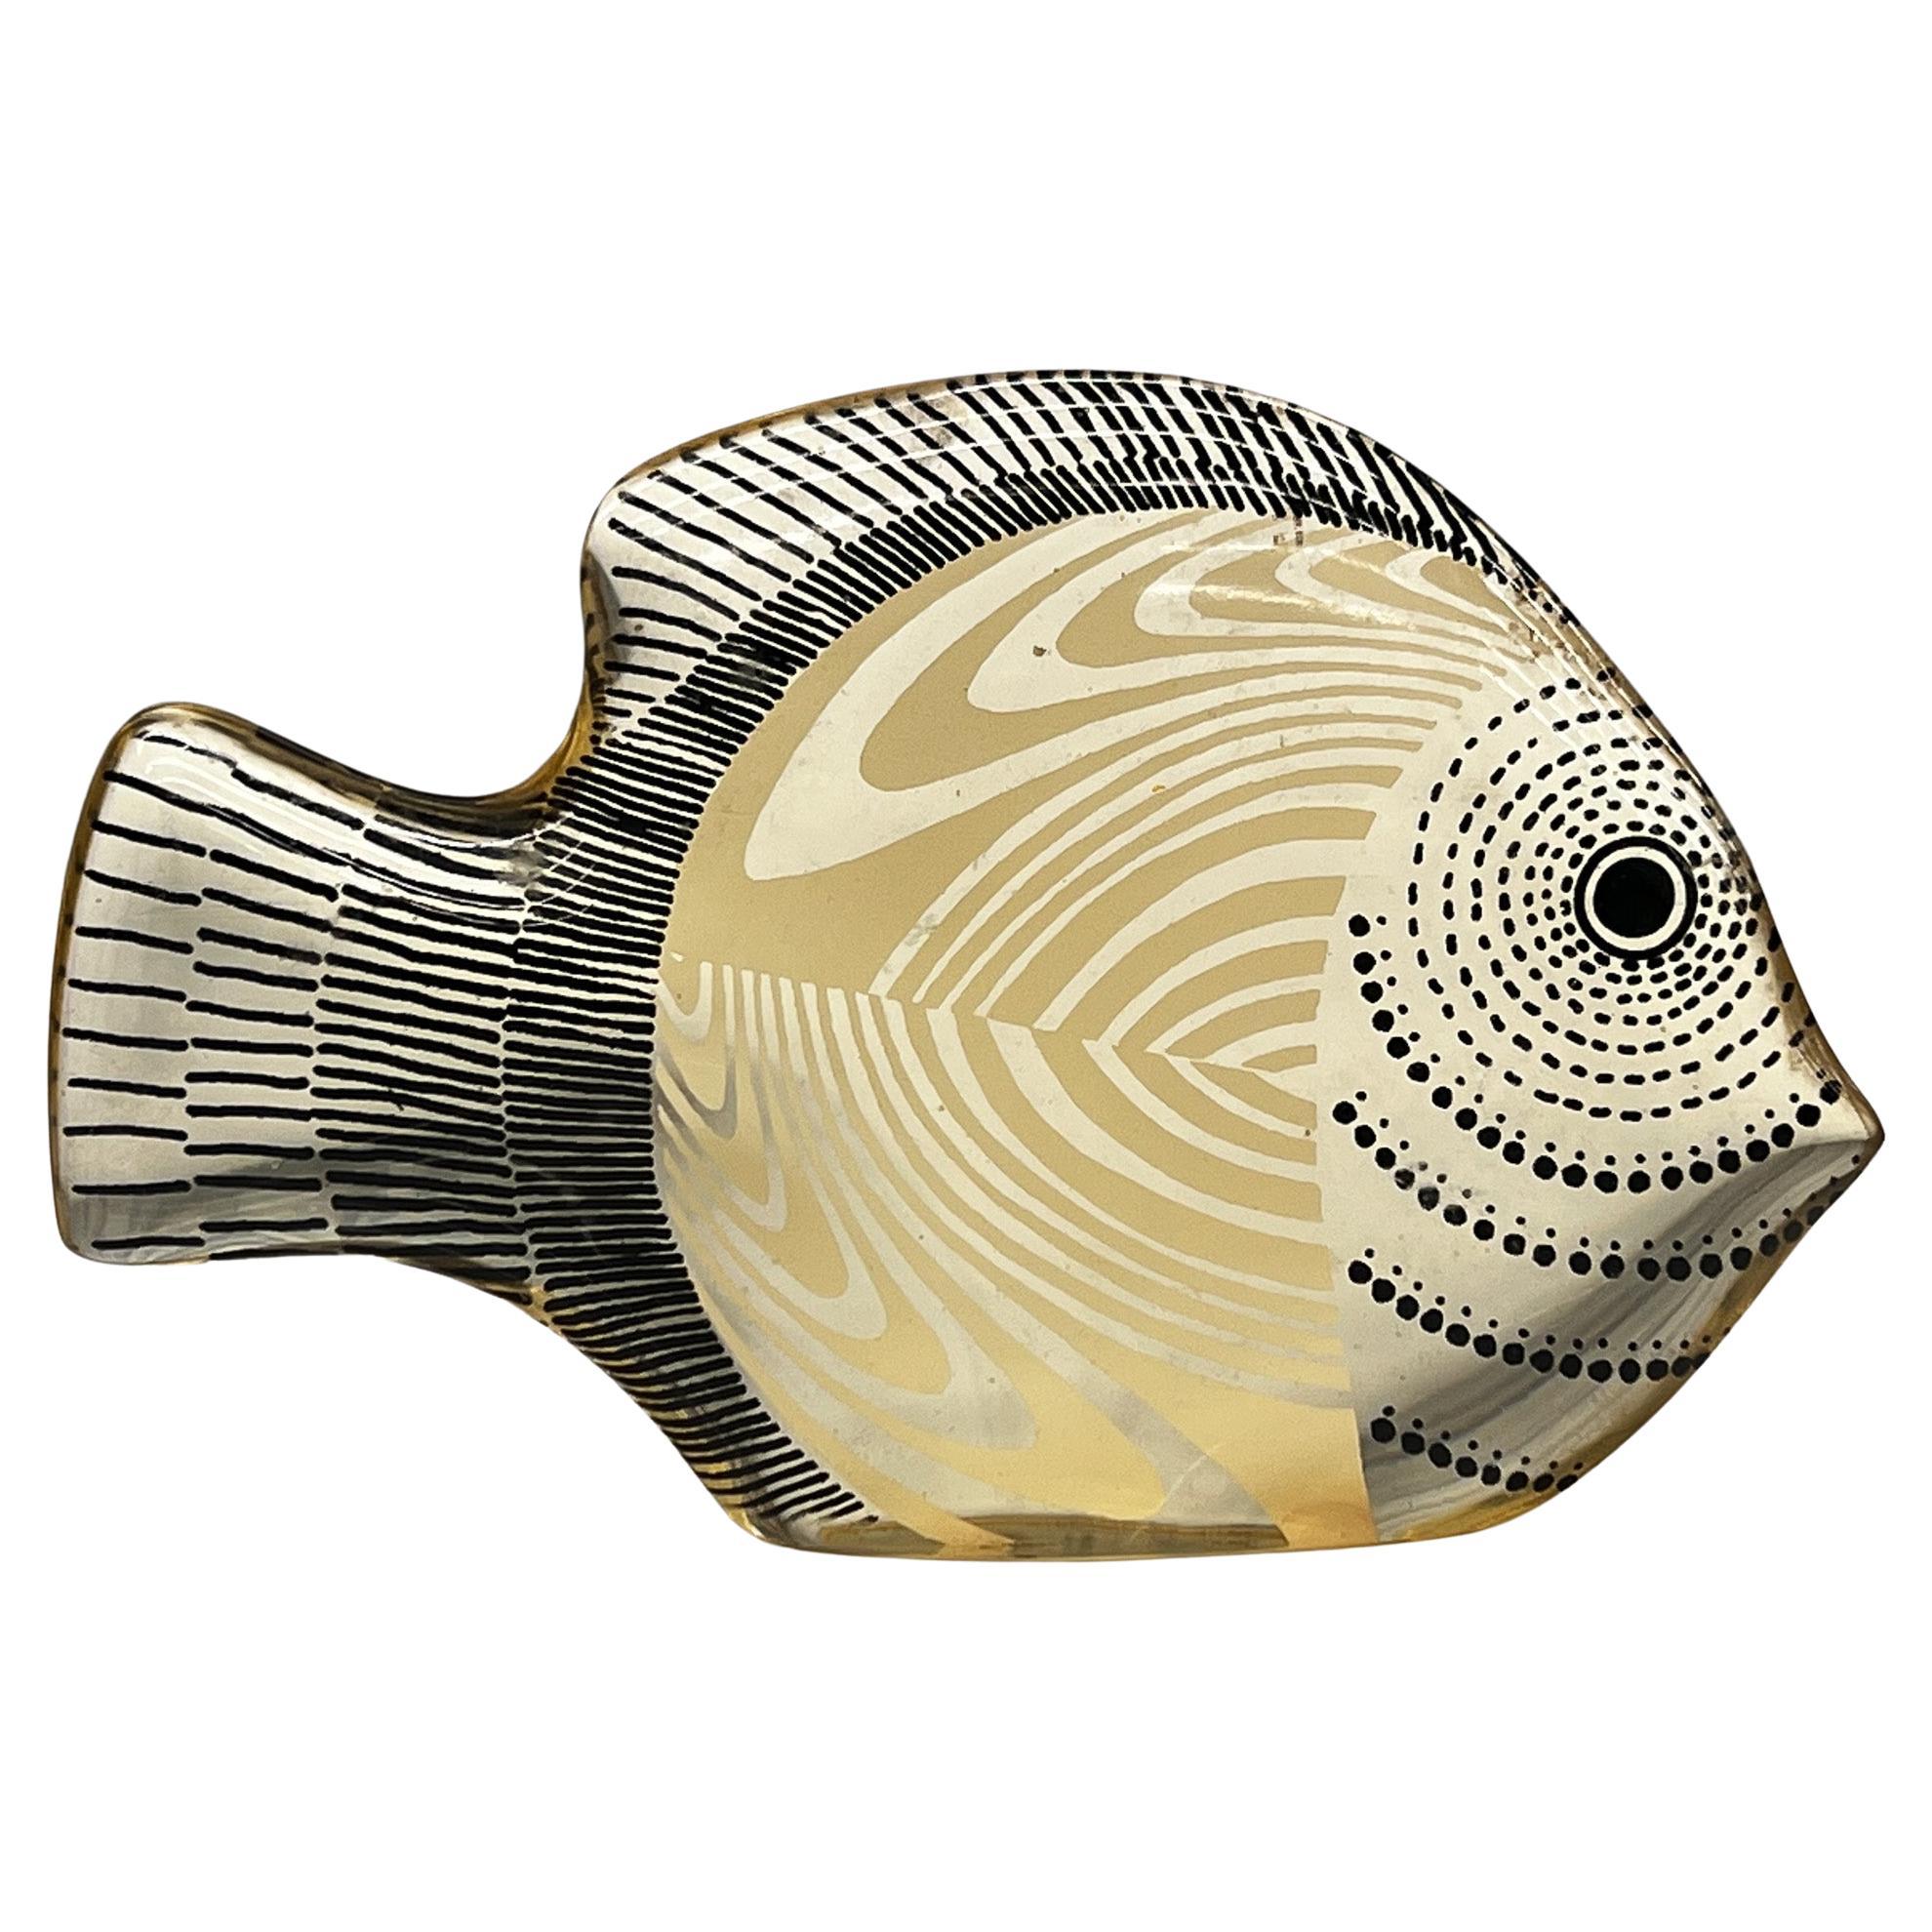 Brazilian Modern Kinetic Sculpture of a Fish in Resin,  Abraham Palatinik, 1960s For Sale